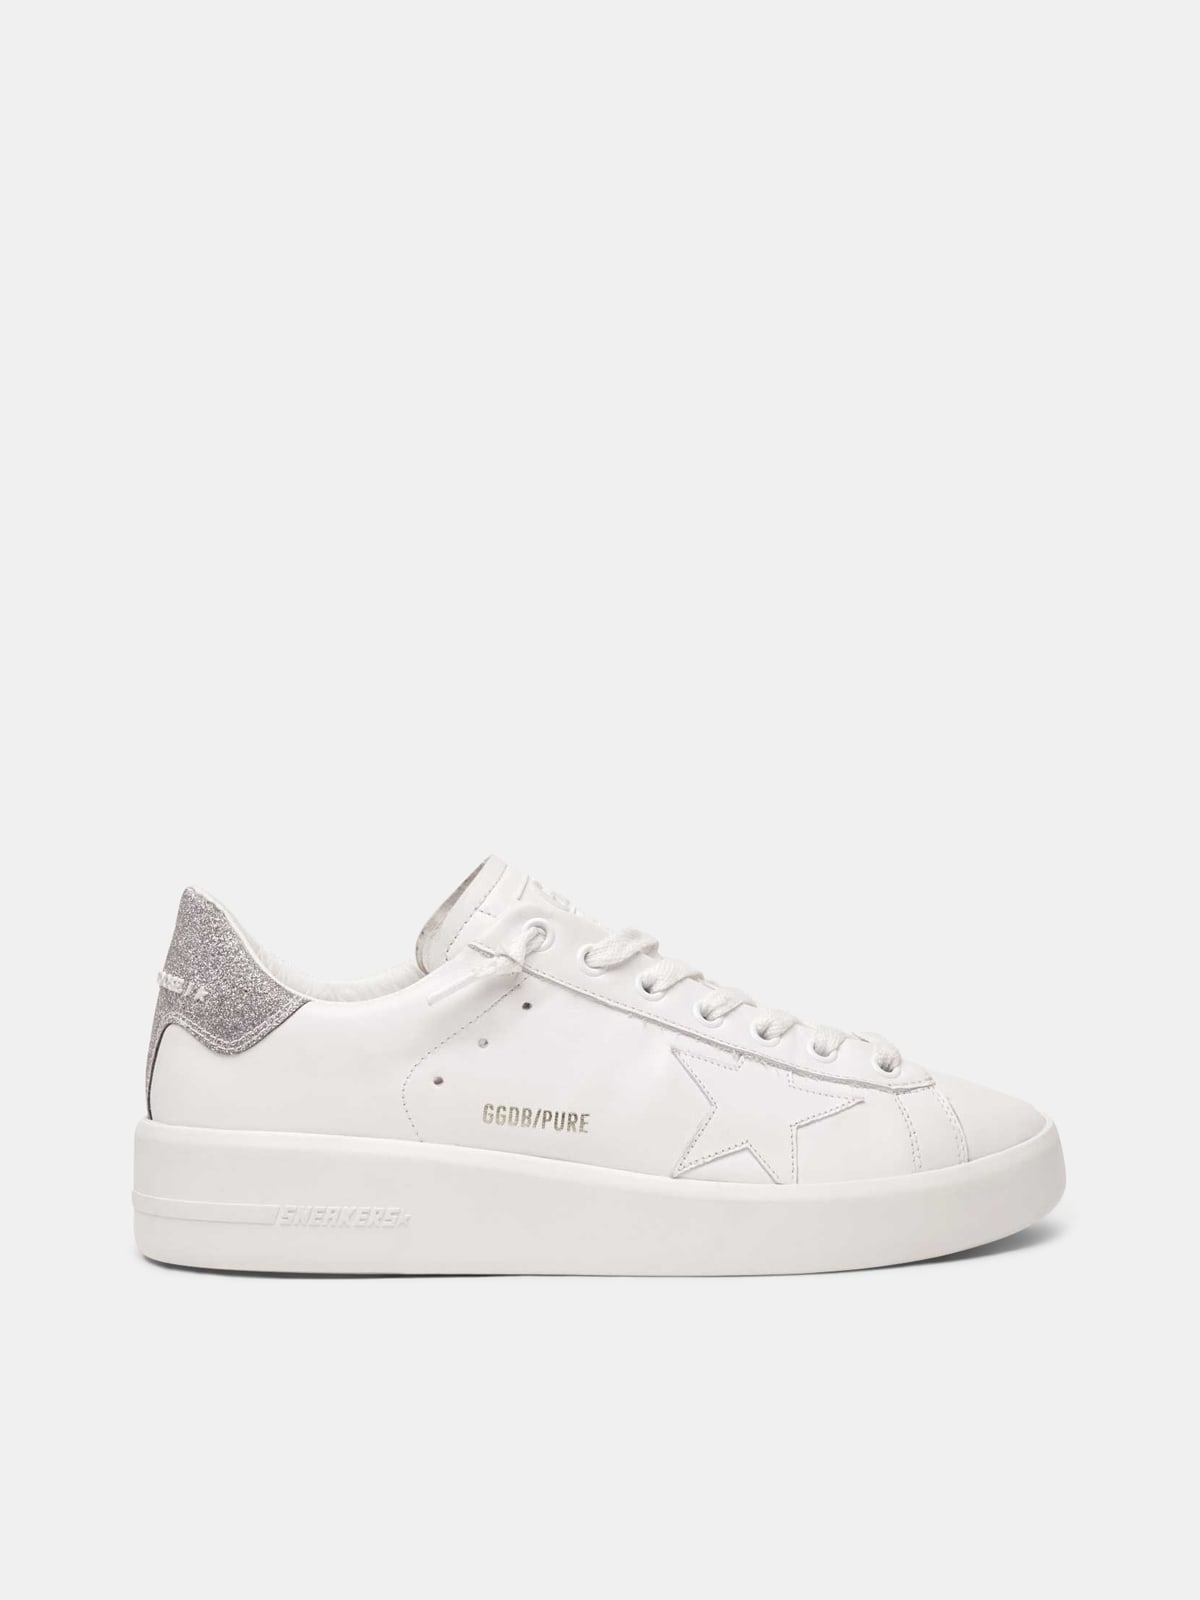 PURESTAR sneakers with glittery silver heel tab | Golden Goose